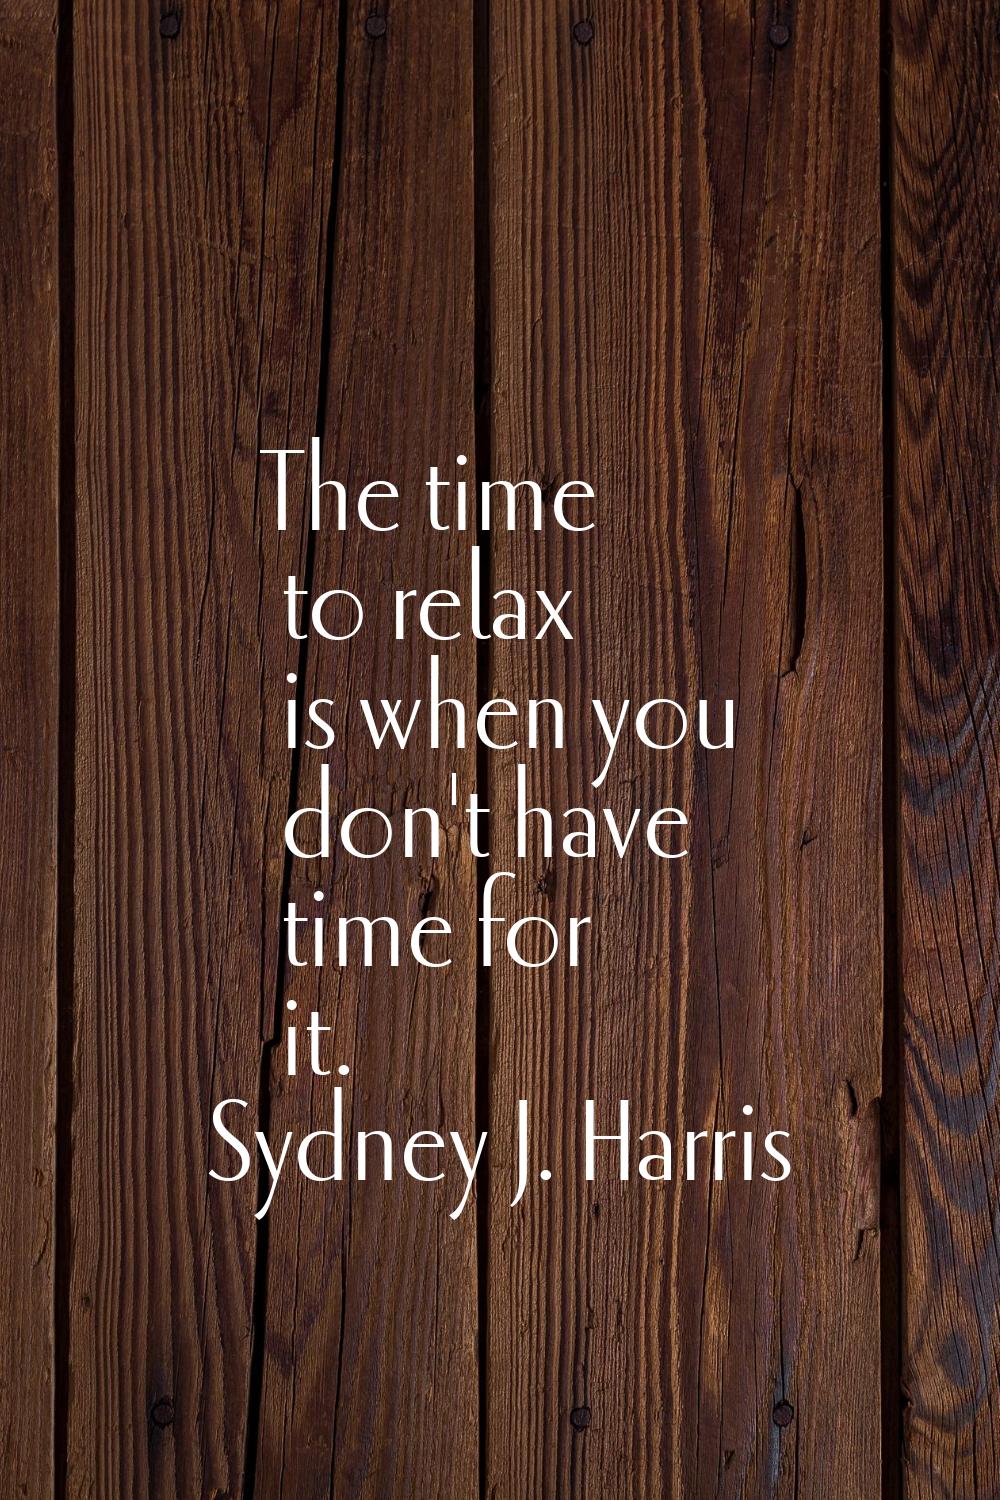 The time to relax is when you don't have time for it.